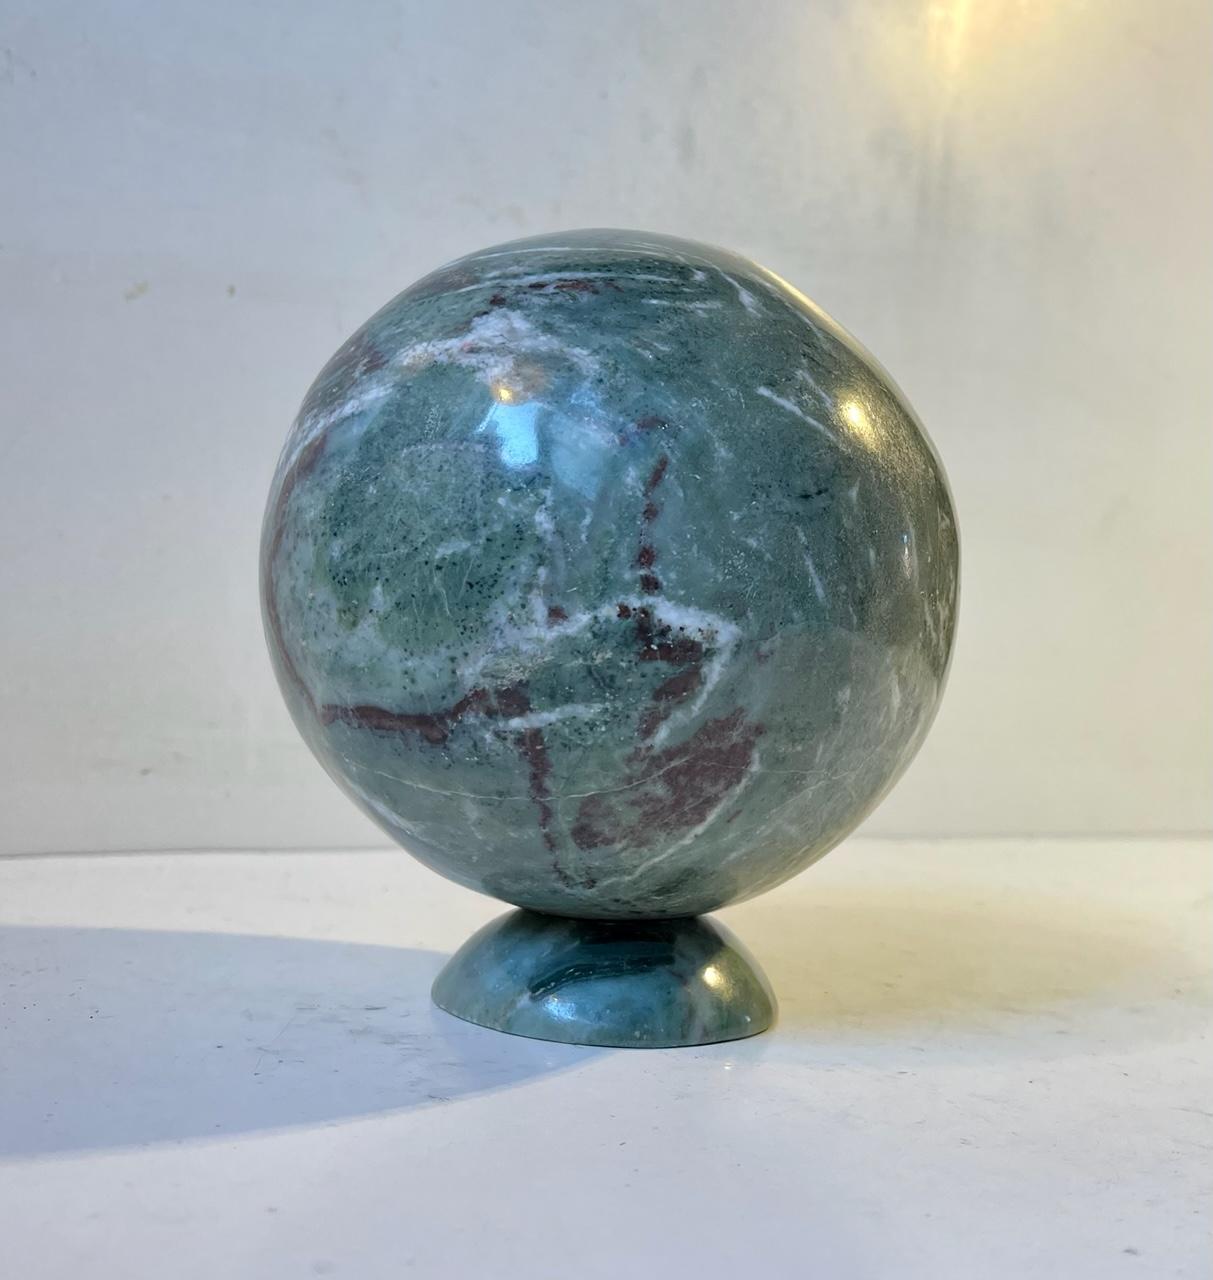 Artisan made sphere with matching stand in green Fuchsite crystal. Mined, crafted and polished in Madagascar ca 1980. Measurements: H: 14 cm, D: 12 cm. Weight: over 2kg. Fuchsite chert also commonly known as 